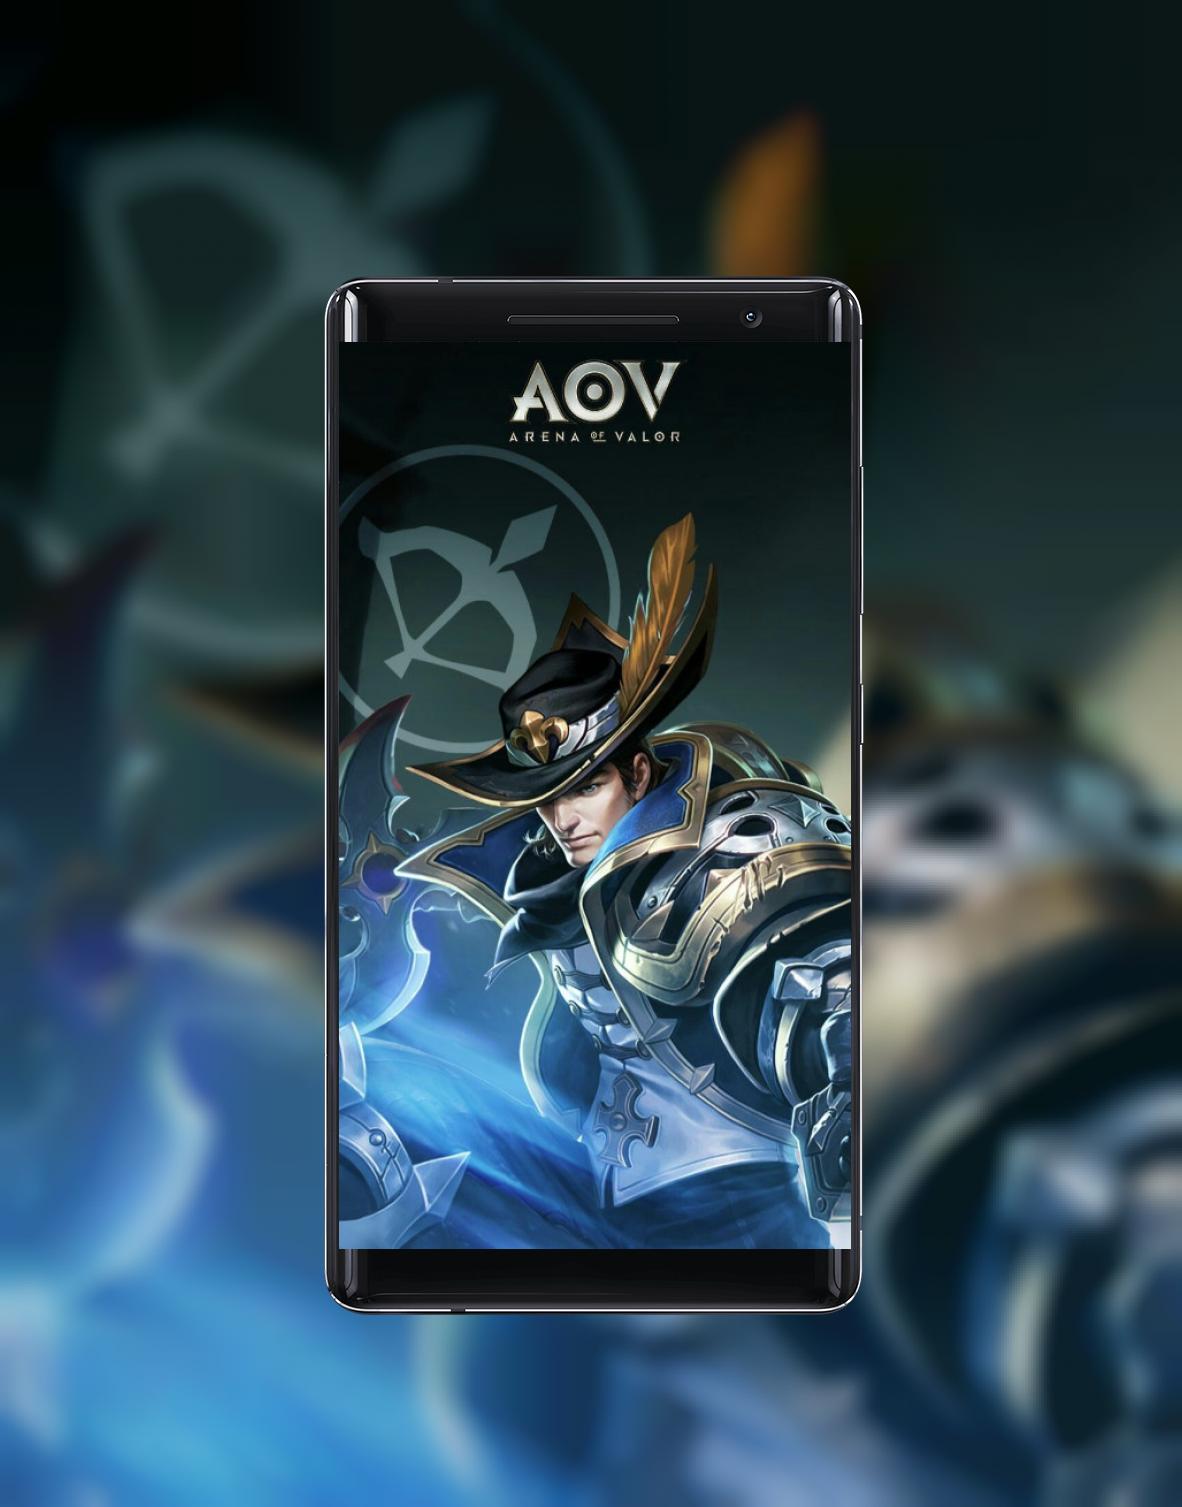 Aov Wallpaper Of Valor Hd For Android Apk Download